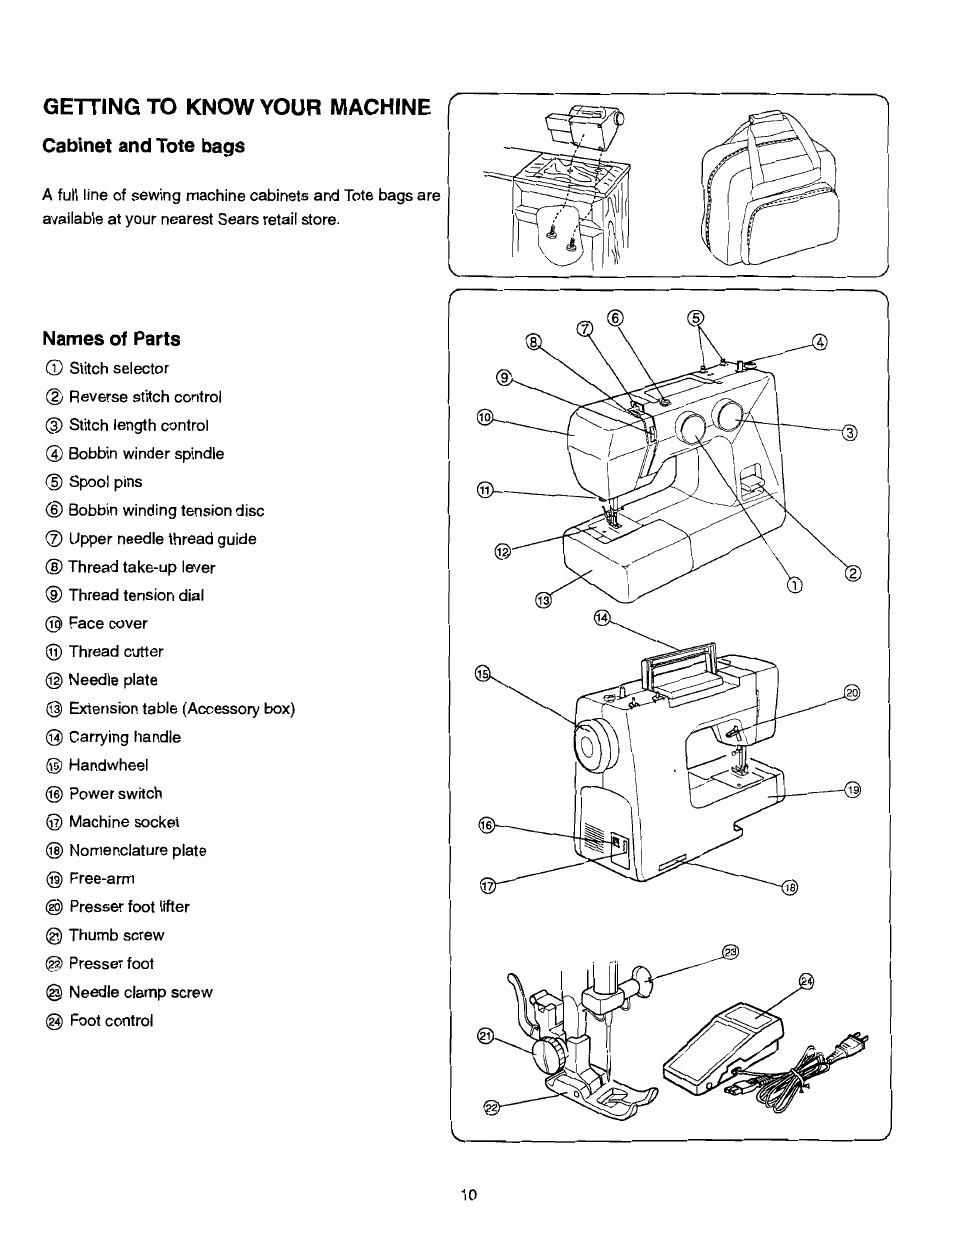 Names of parts, Getting to know your machine | SINGER 384.13012 (Sold at Sears) User Manual | Page 10 / 79